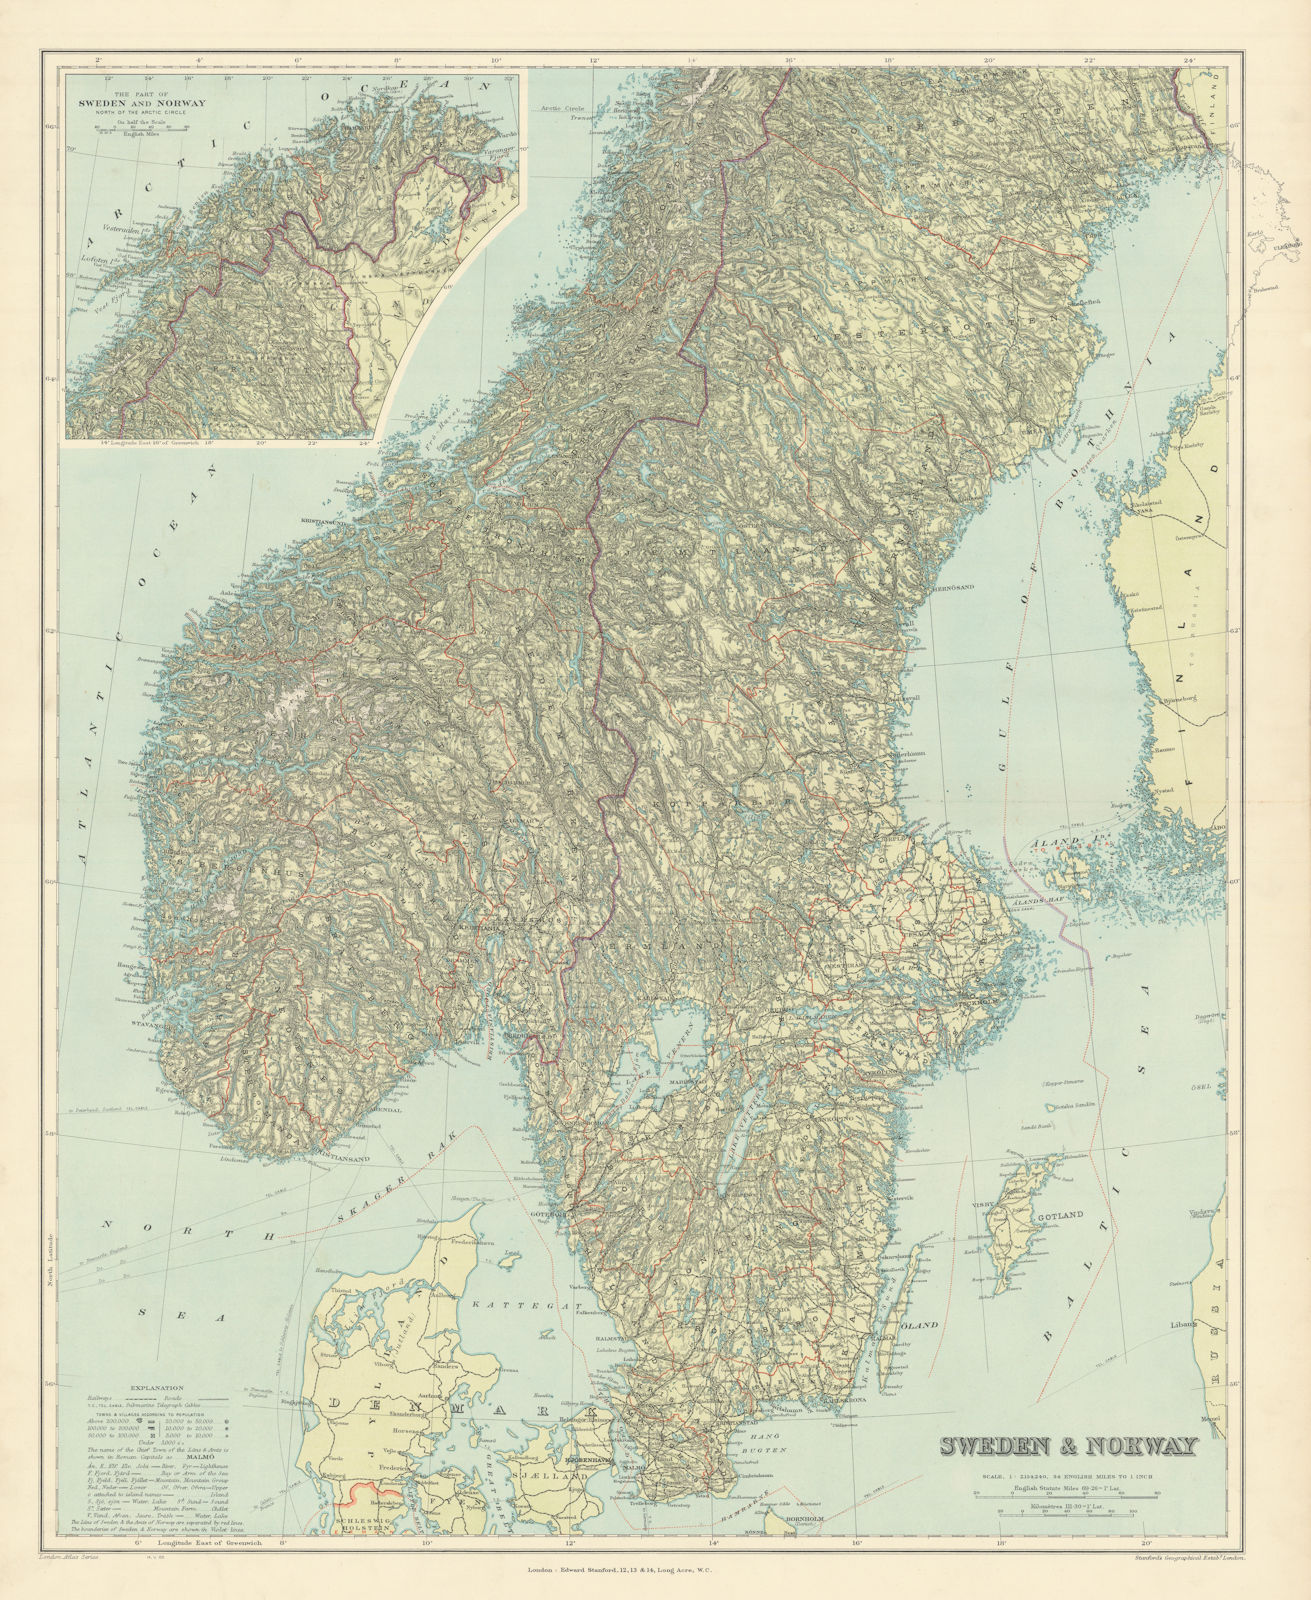 Associate Product Scandinavia physical mountains fjords glaciers. Sweden Norway. STANFORD 1904 map